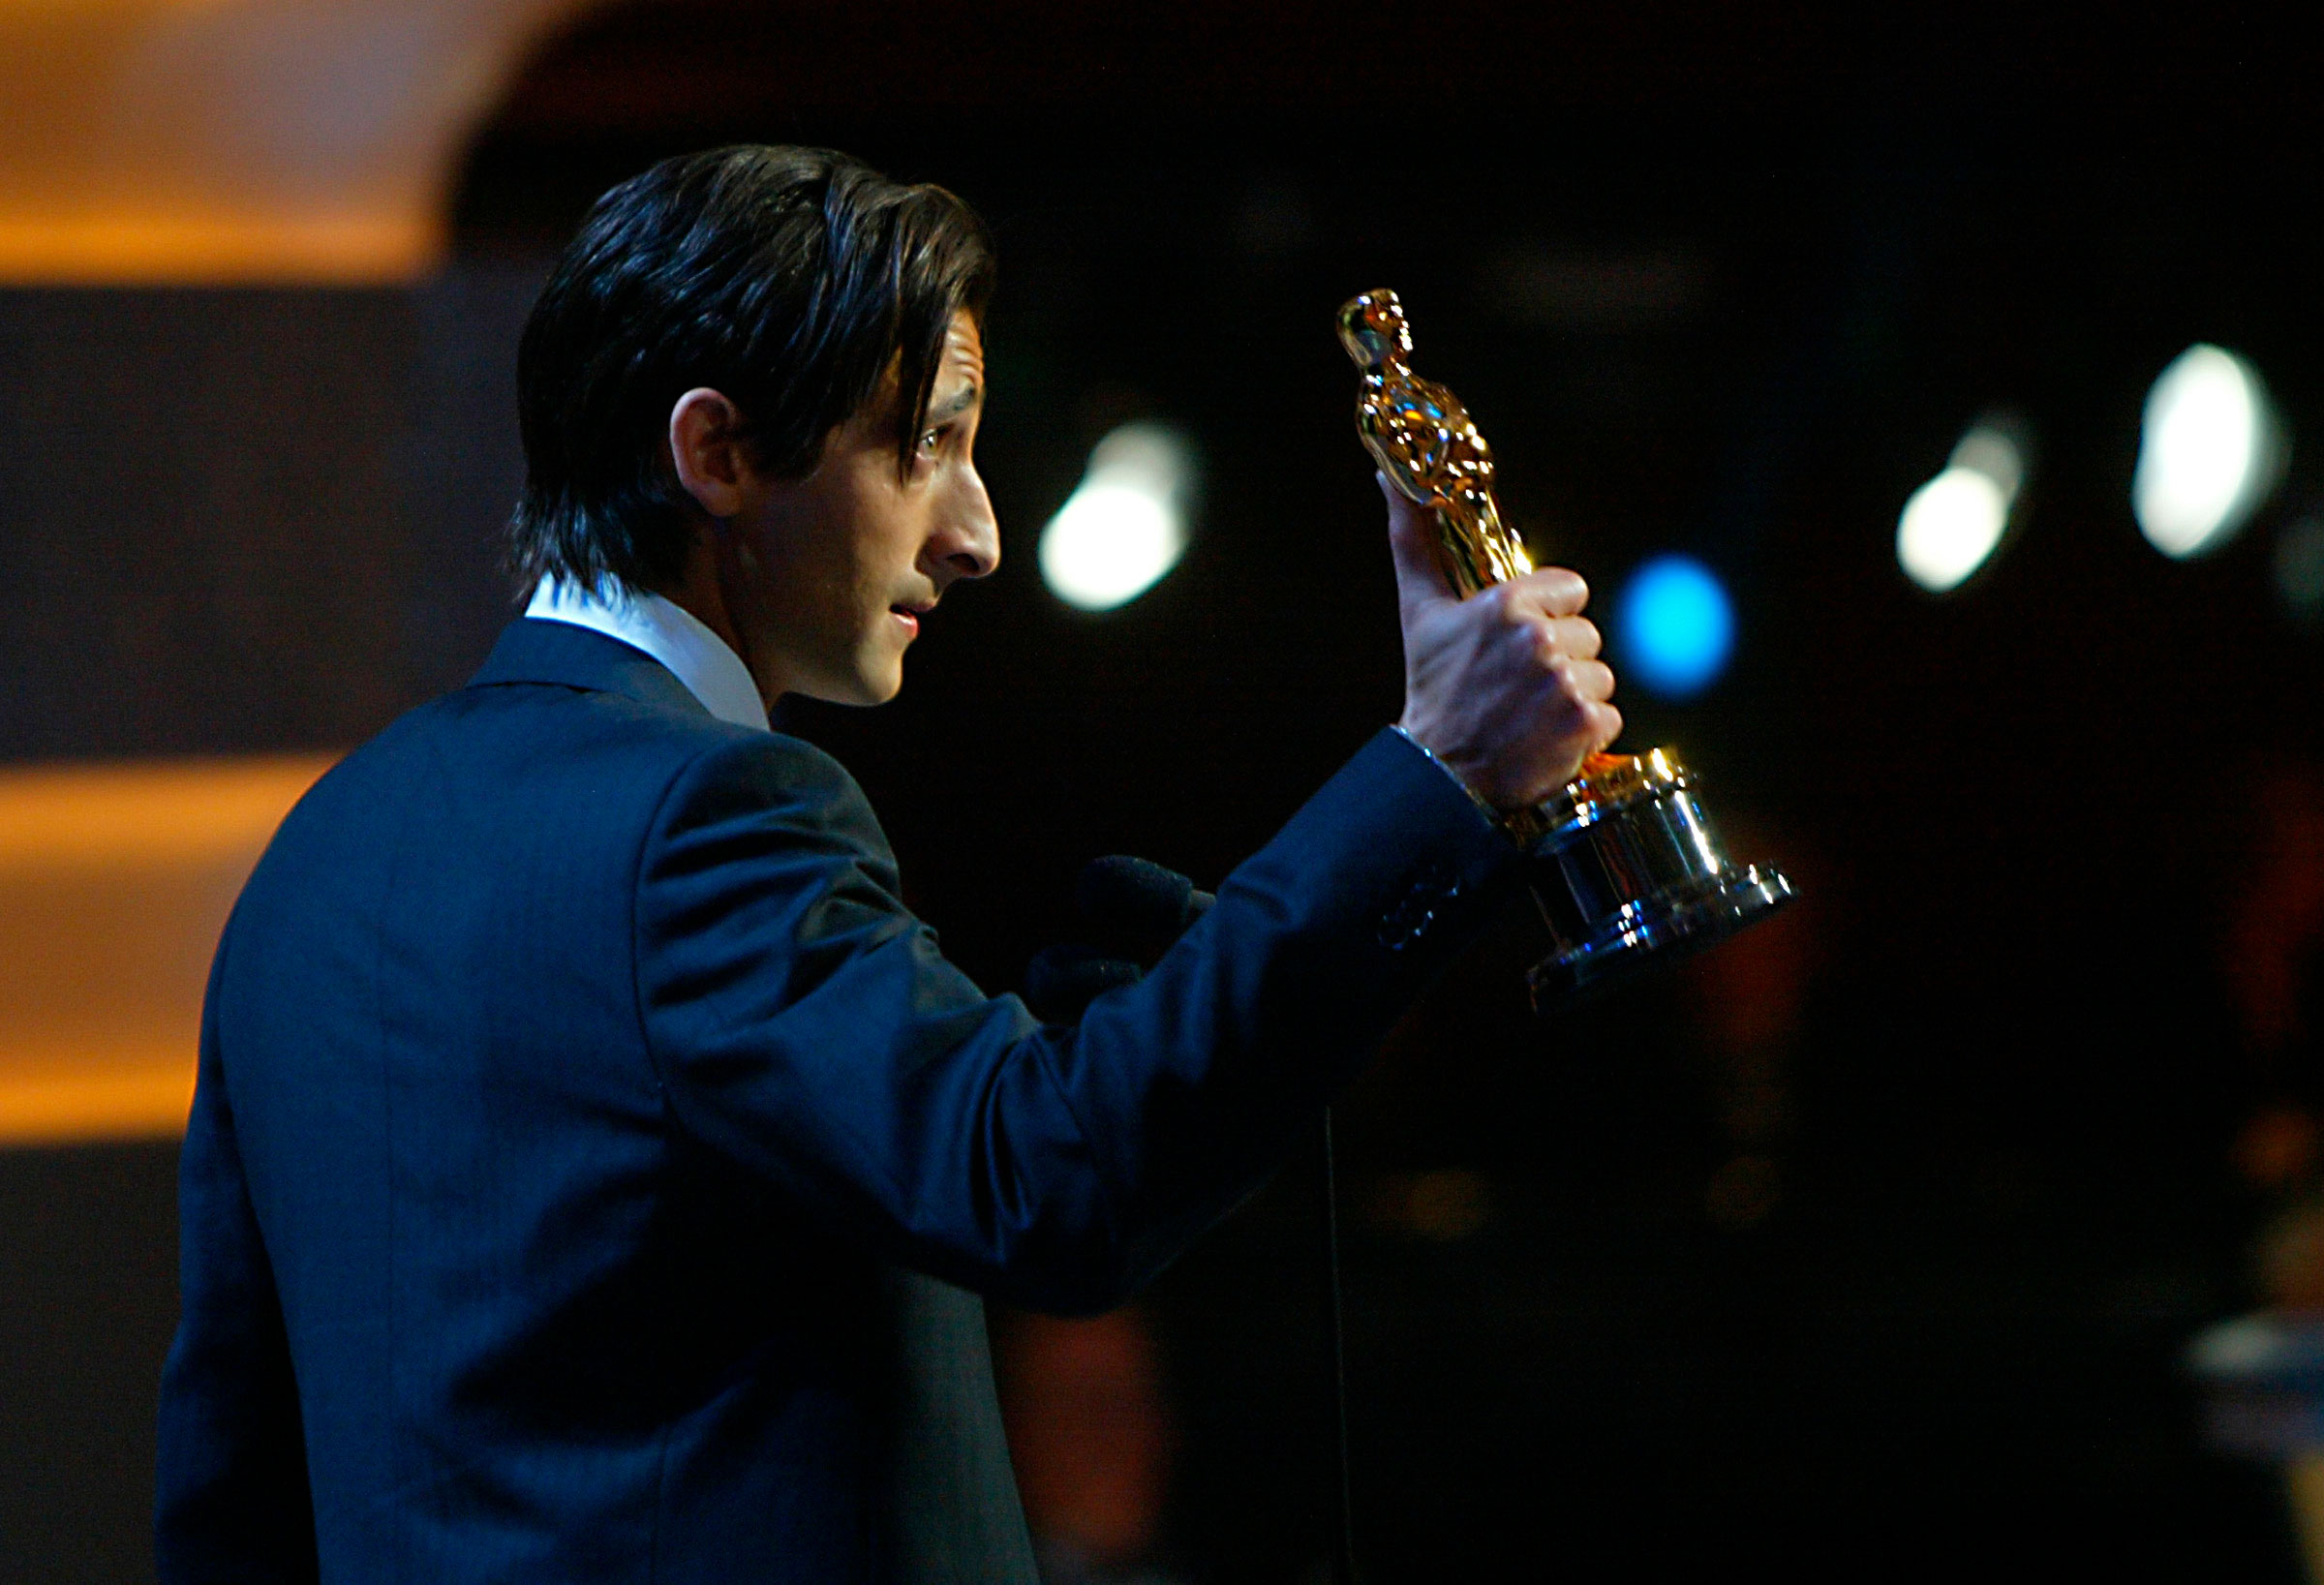 Adrien Brody accepts the Oscar for Best Actor for The Pianist, at the 75th Annual Academy Awards on March 23, 2003.